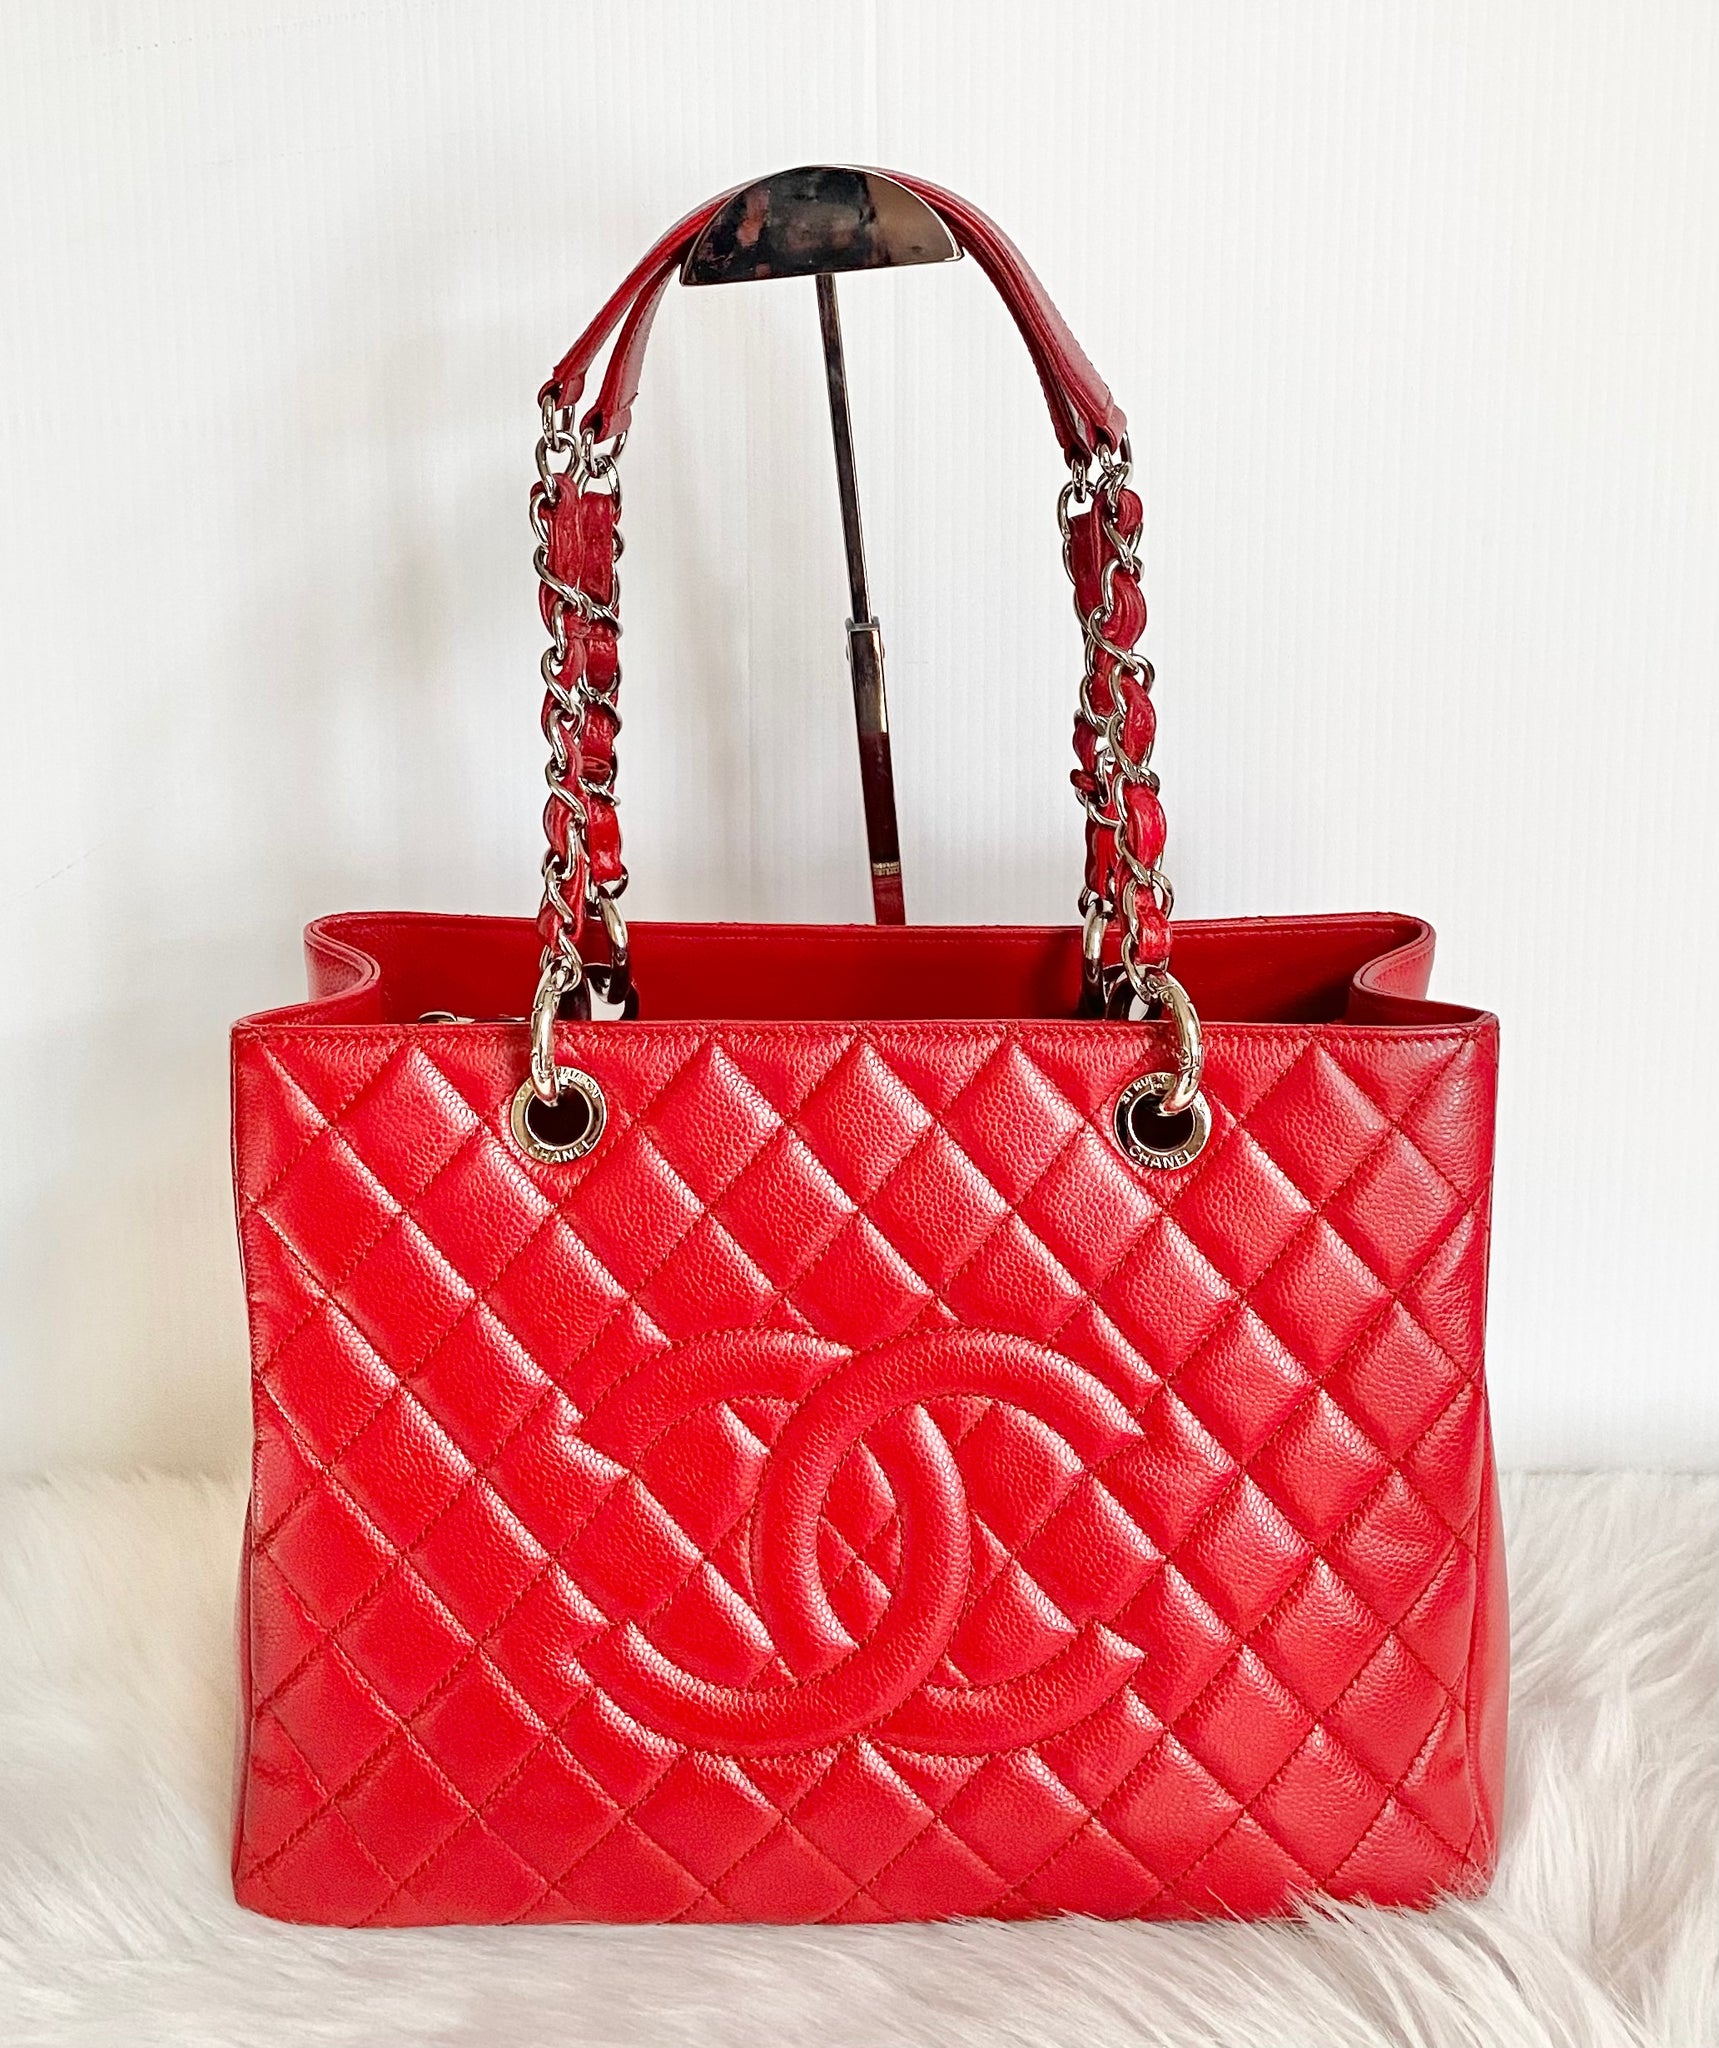 Chanel Red Tote